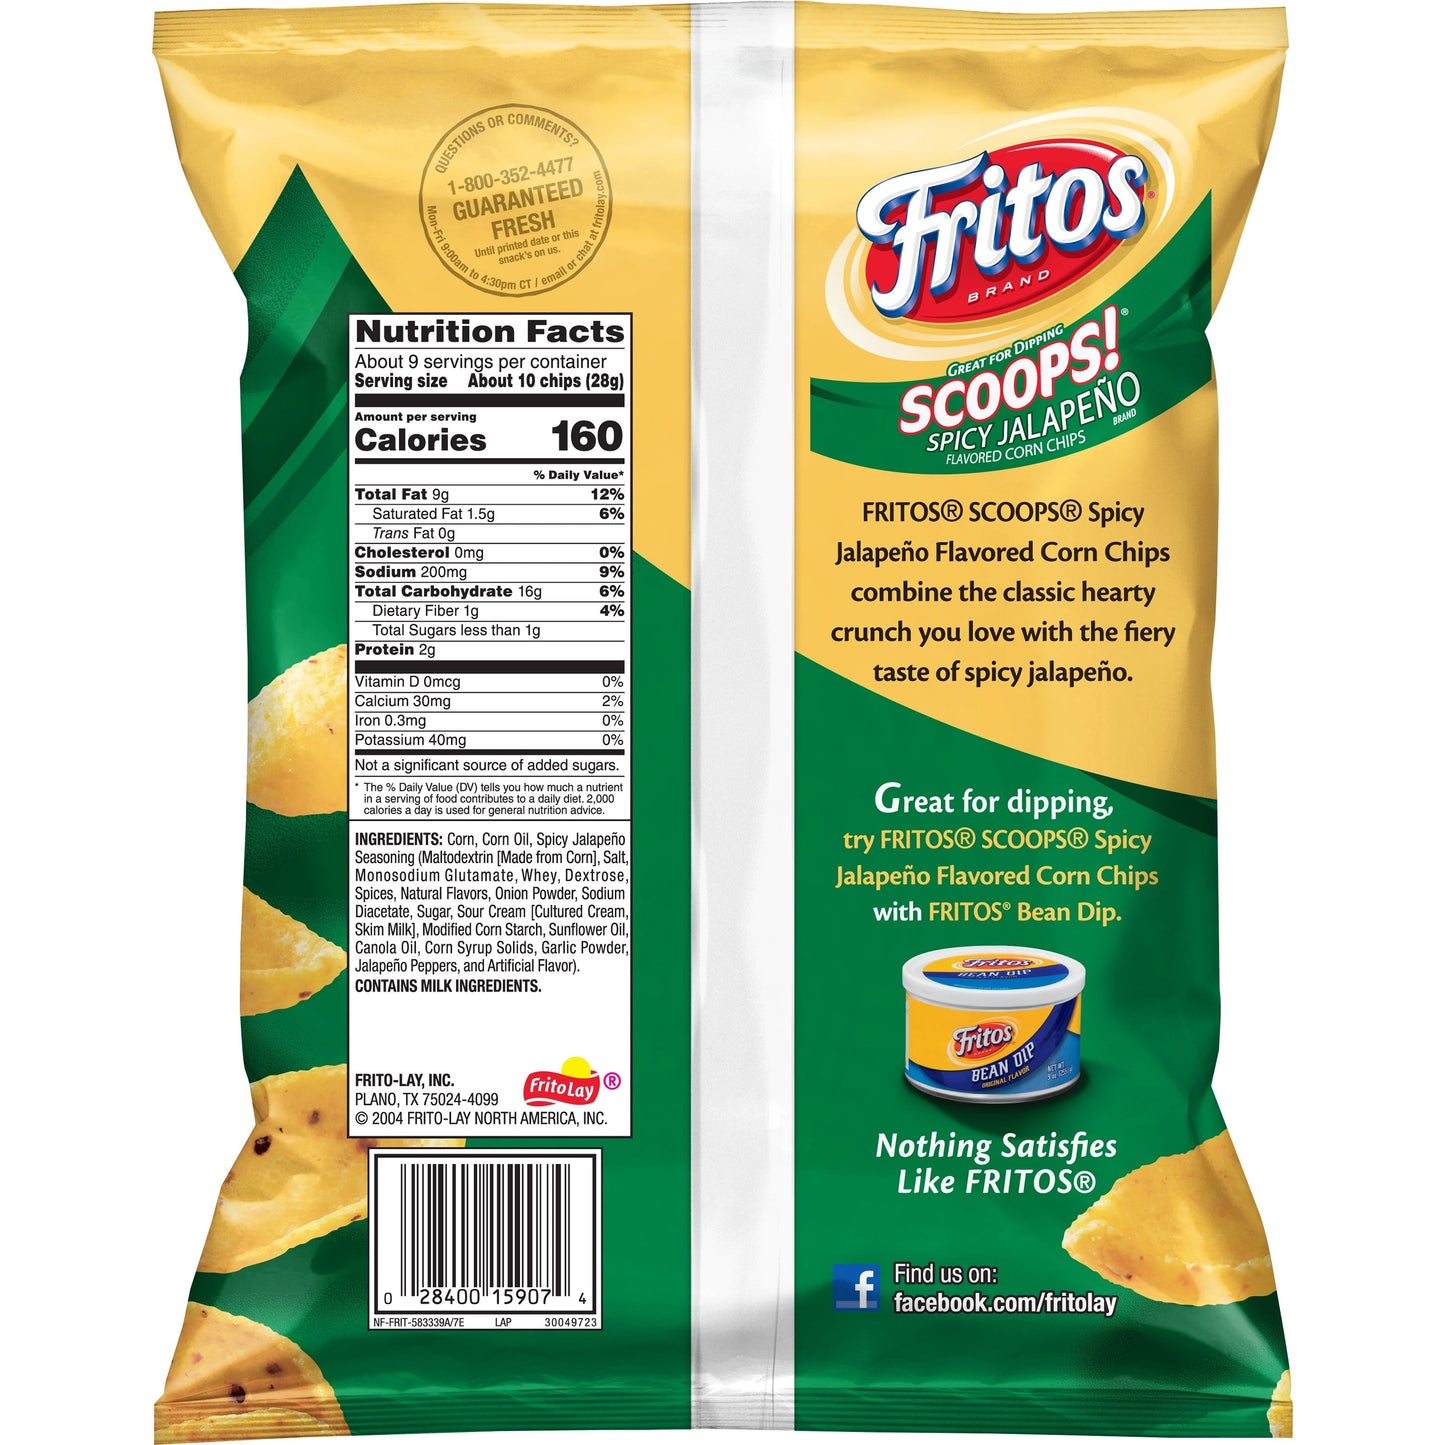 Fritos Scoops Spicy Jalapeno Flavored Corn Chips, 9.25 oz Bag